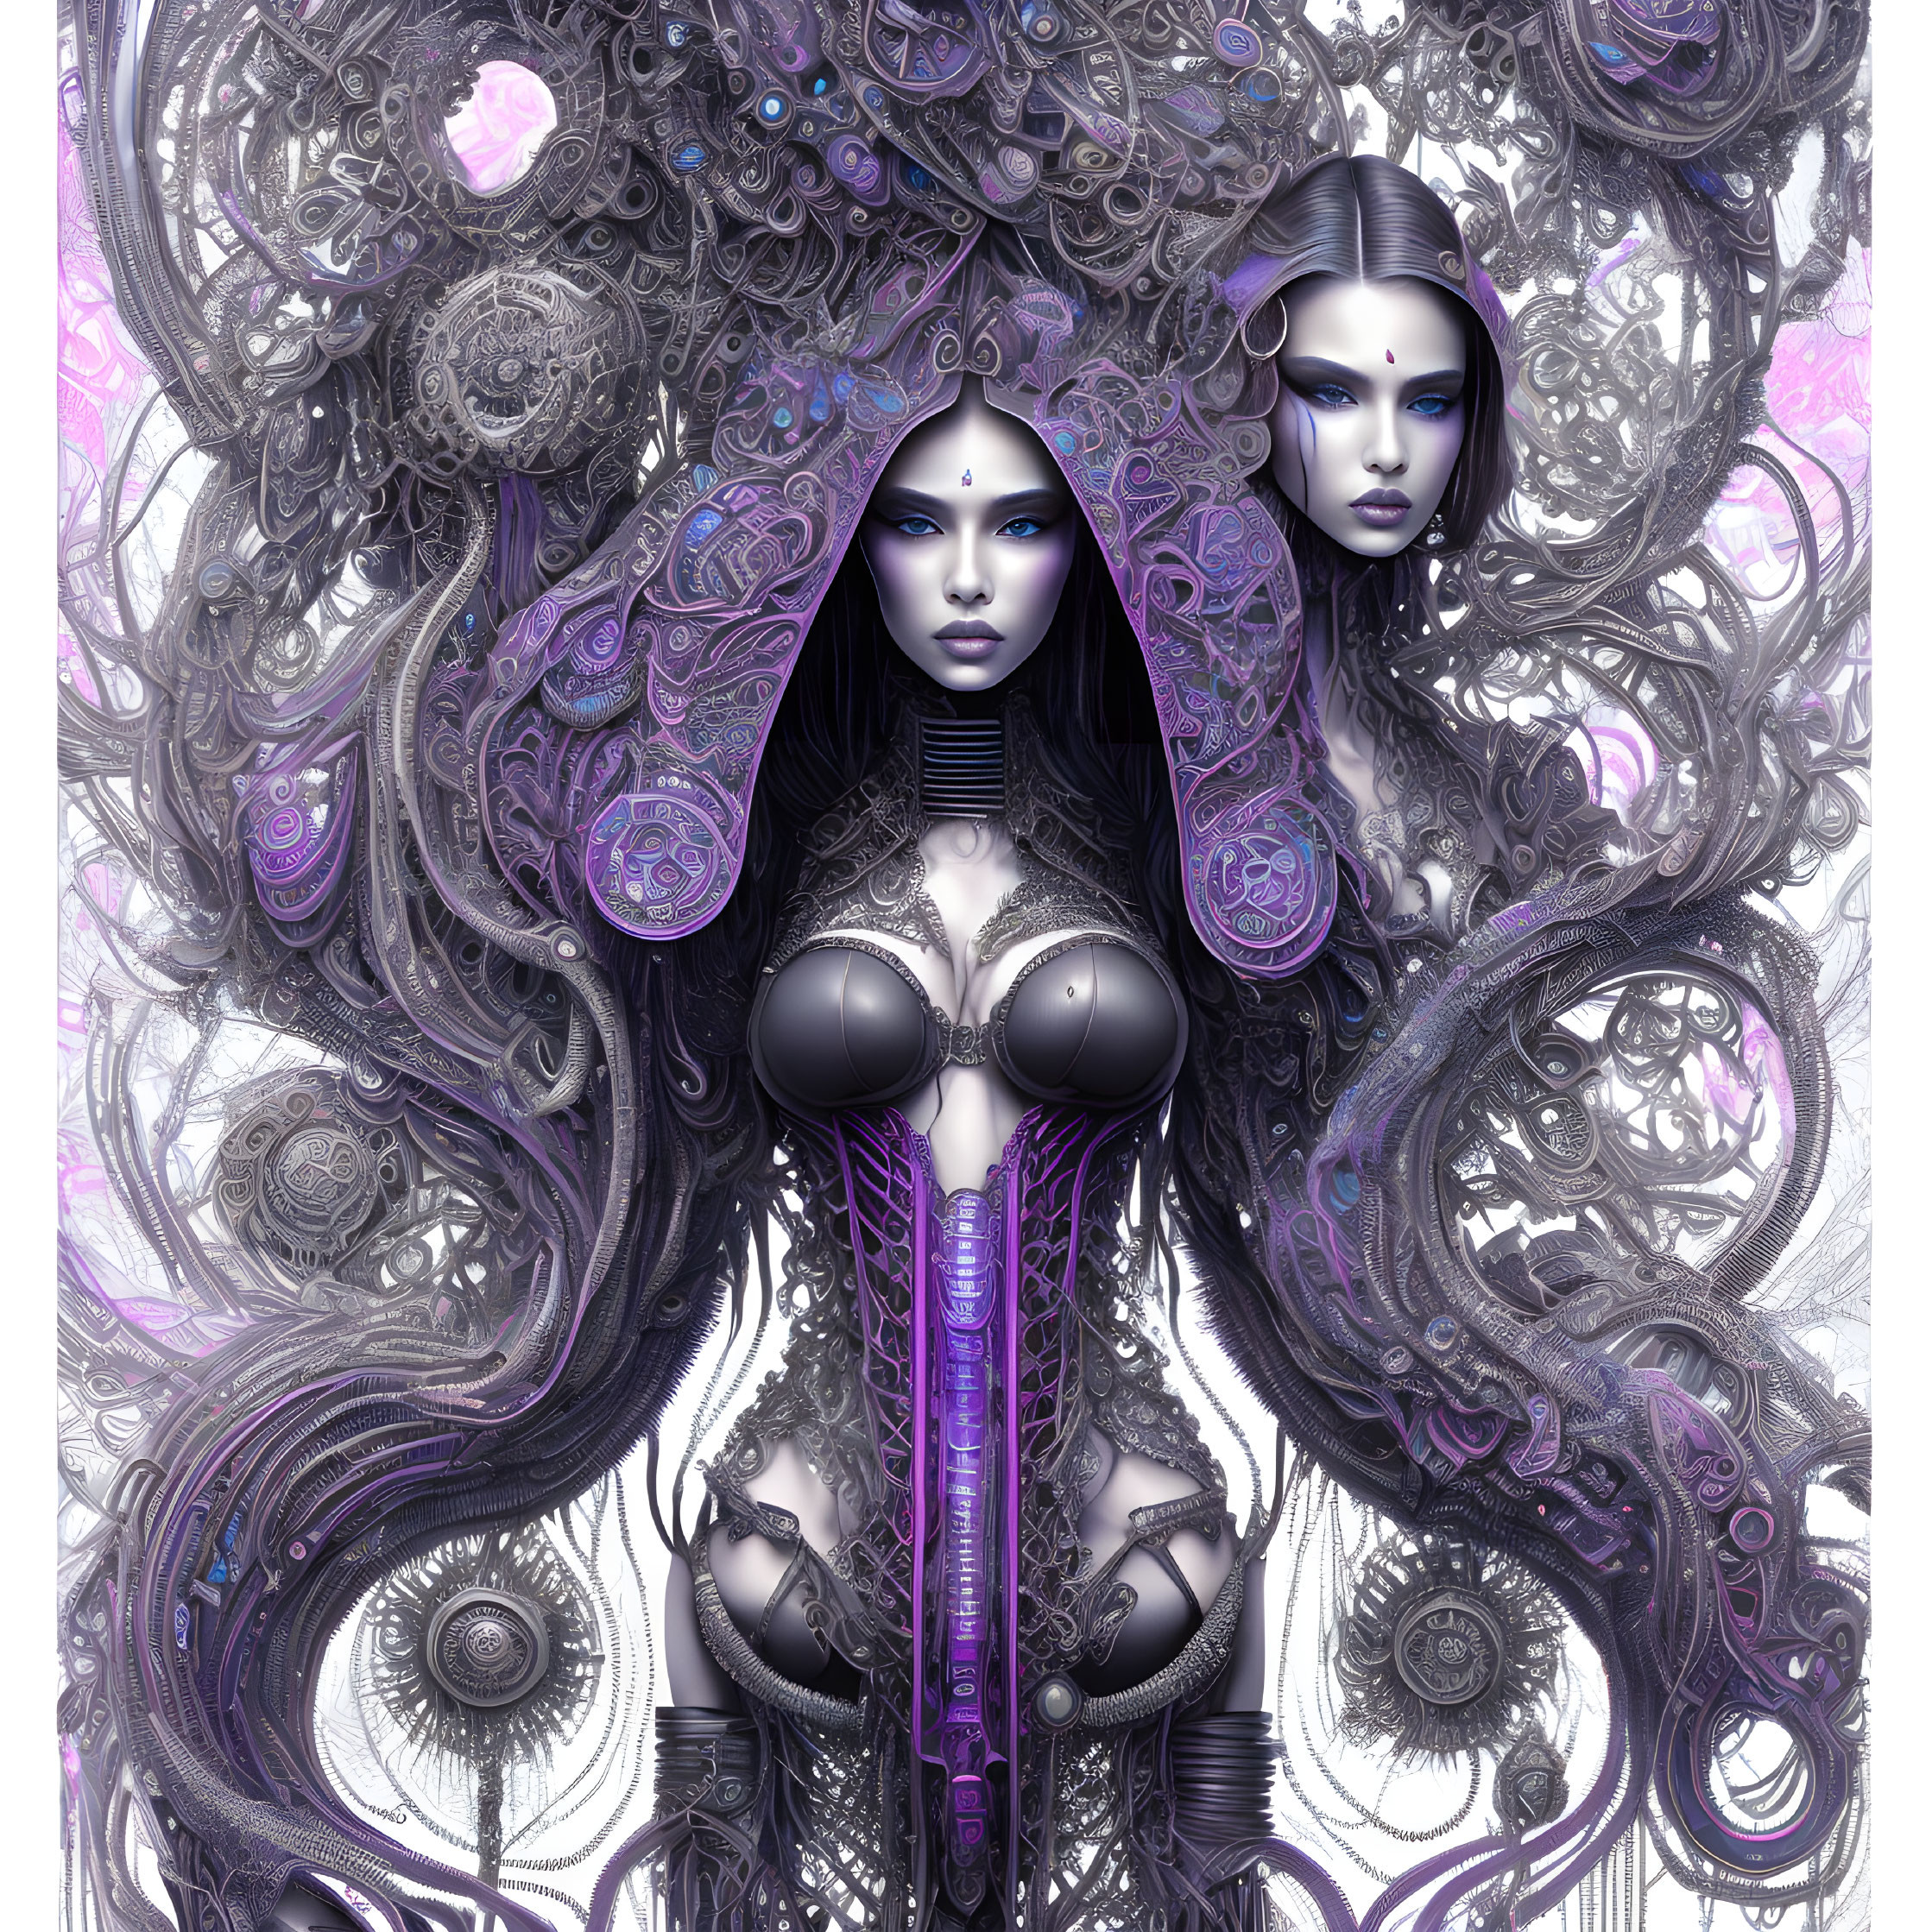 Symmetrical Female Figures with Mechanical Hair in Purple and Black